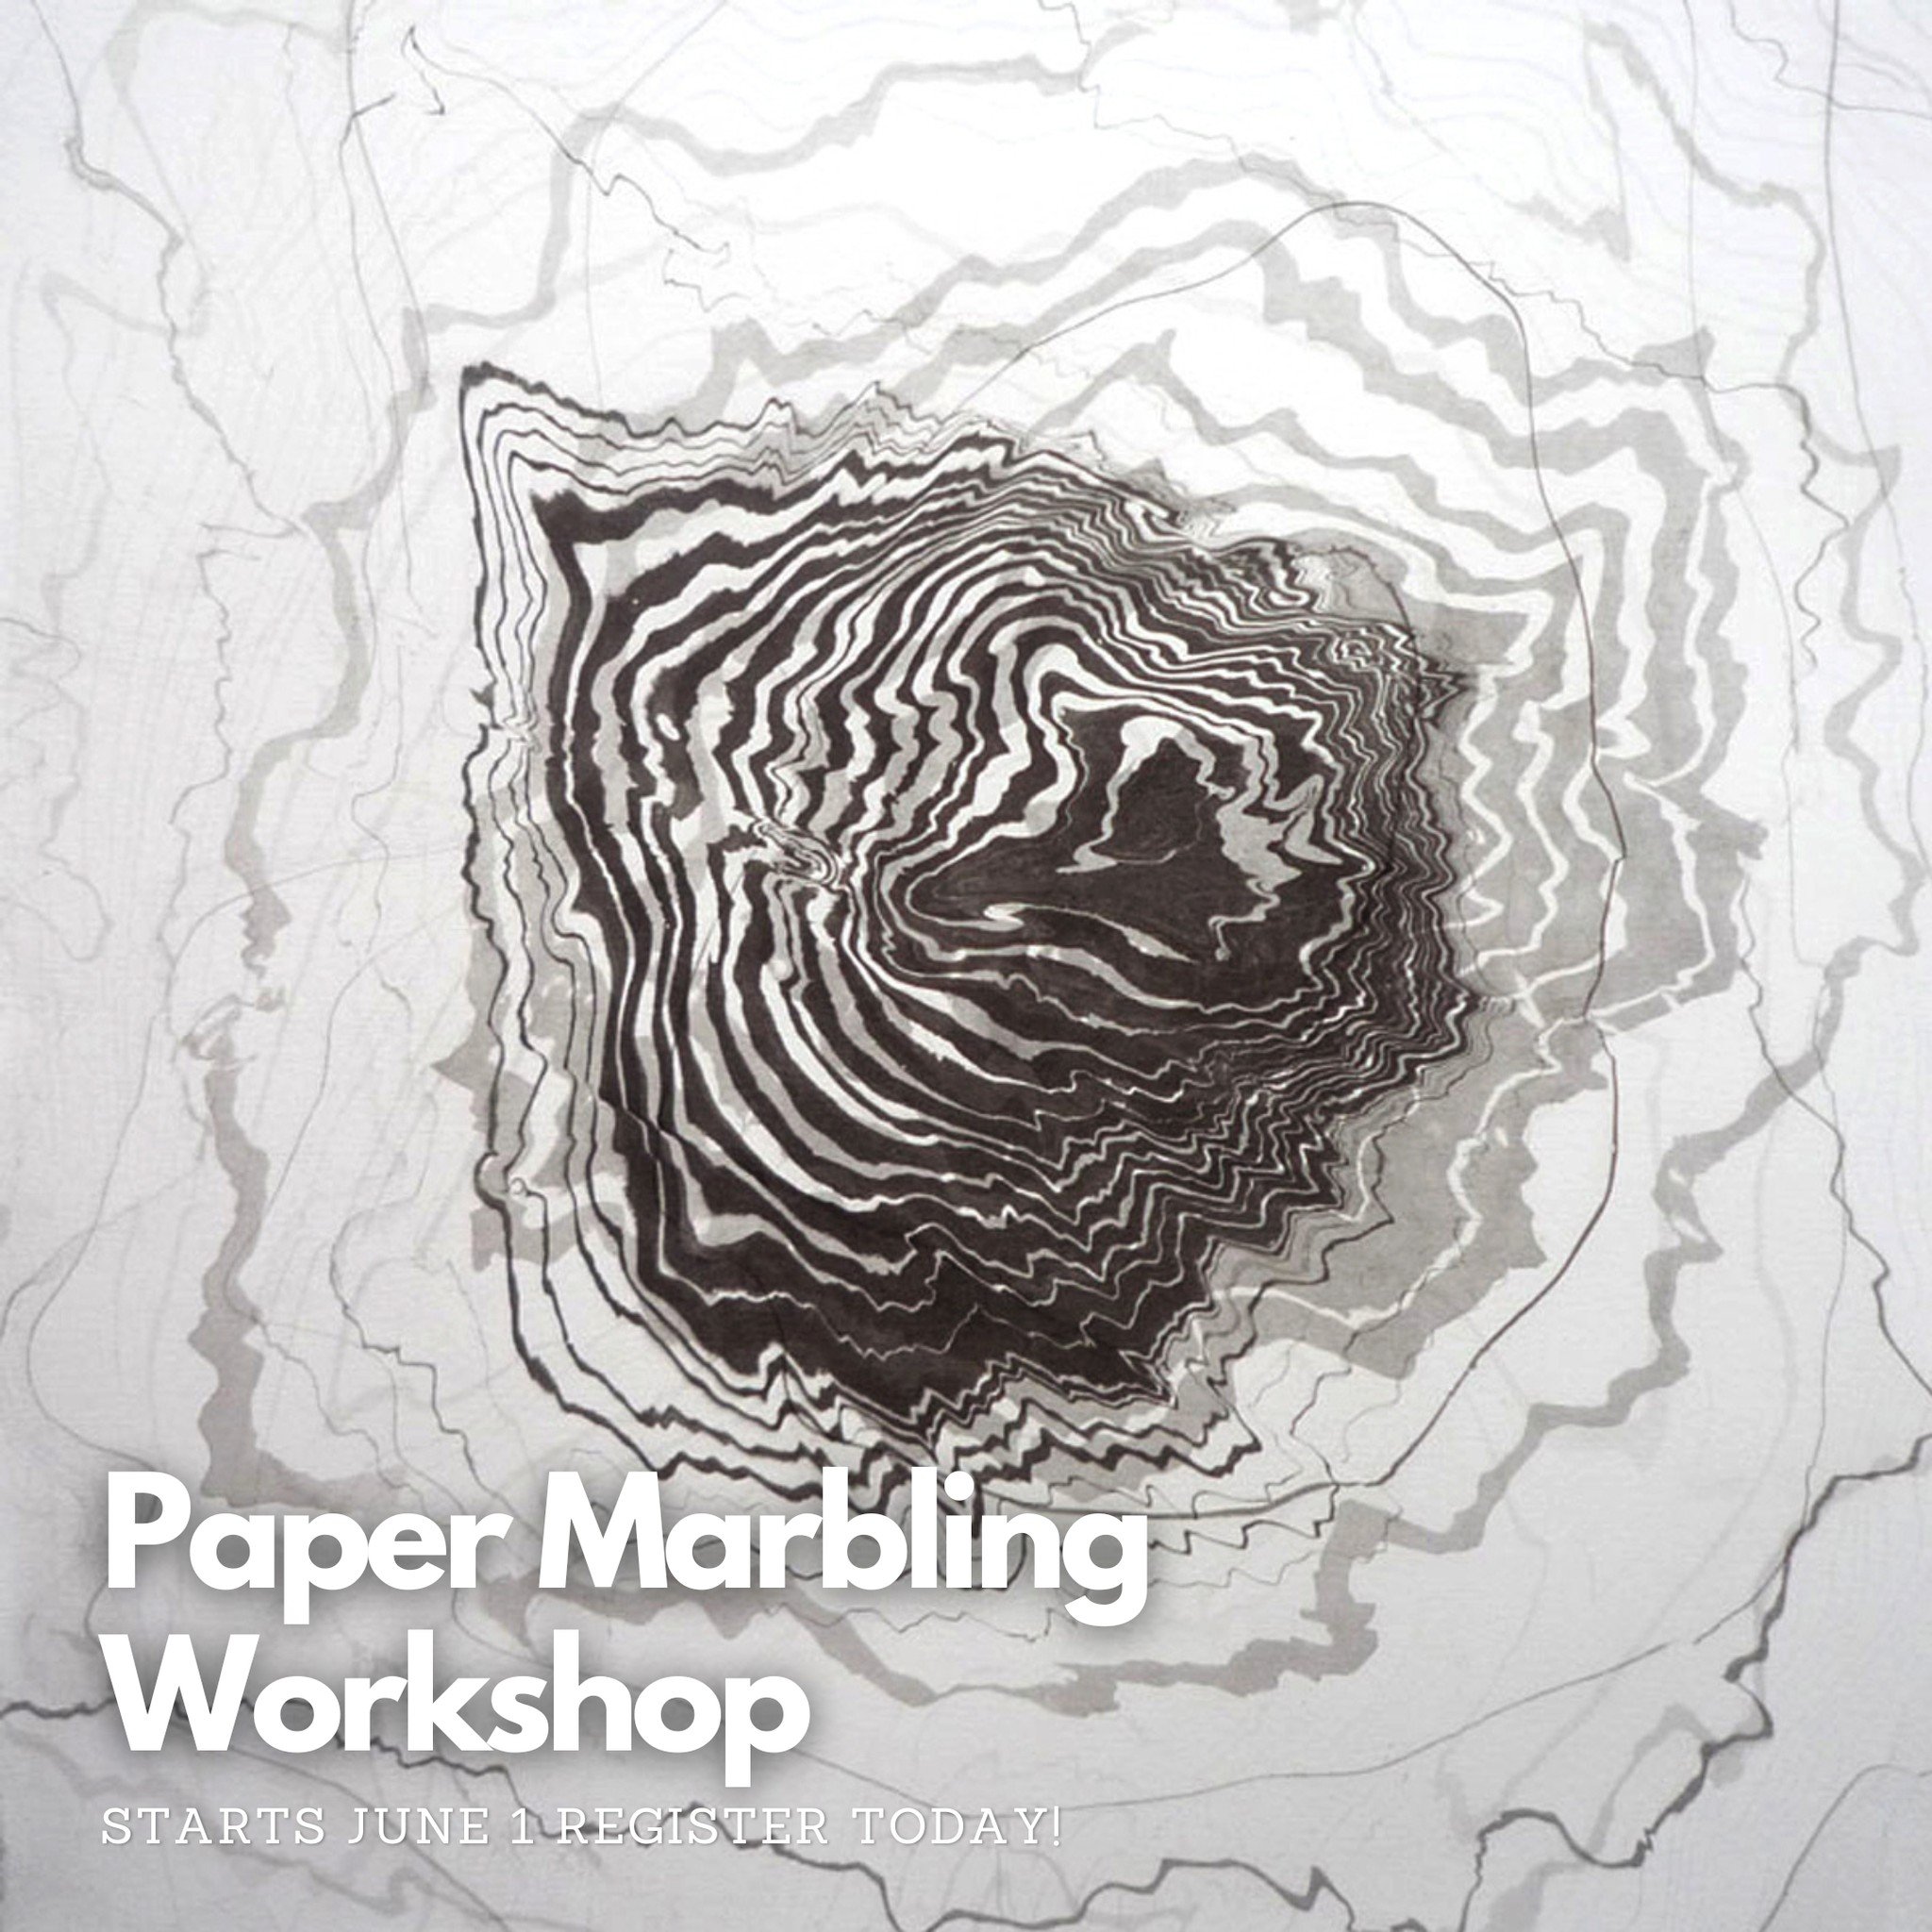 Learn how to create visual magic with paper! Register today for our Paper Marbling Workshop.

🟡 Paper Marbling Workshop (18+) 1-day workshop / Saturday, June 1 from 10 AM-12 PM

With guidance from Diana Stezalski, students will explore the magic of 